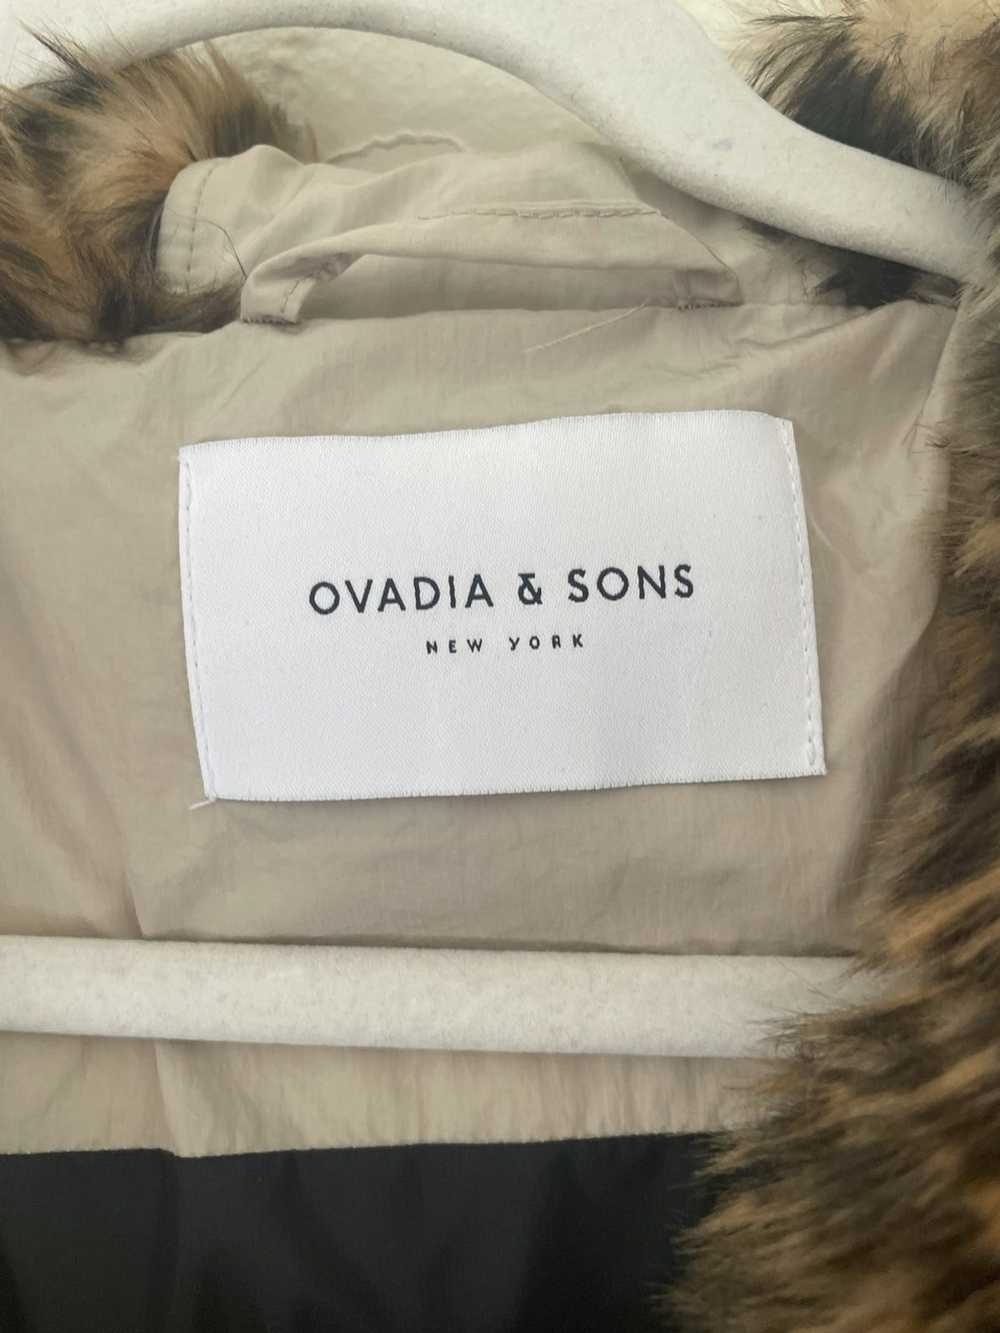 Ovadia & Sons Ovidia and sons down Jacket - image 6